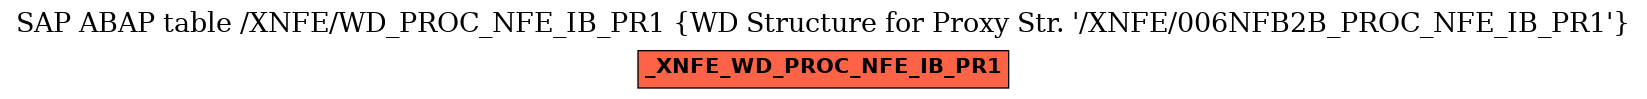 E-R Diagram for table /XNFE/WD_PROC_NFE_IB_PR1 (WD Structure for Proxy Str. 